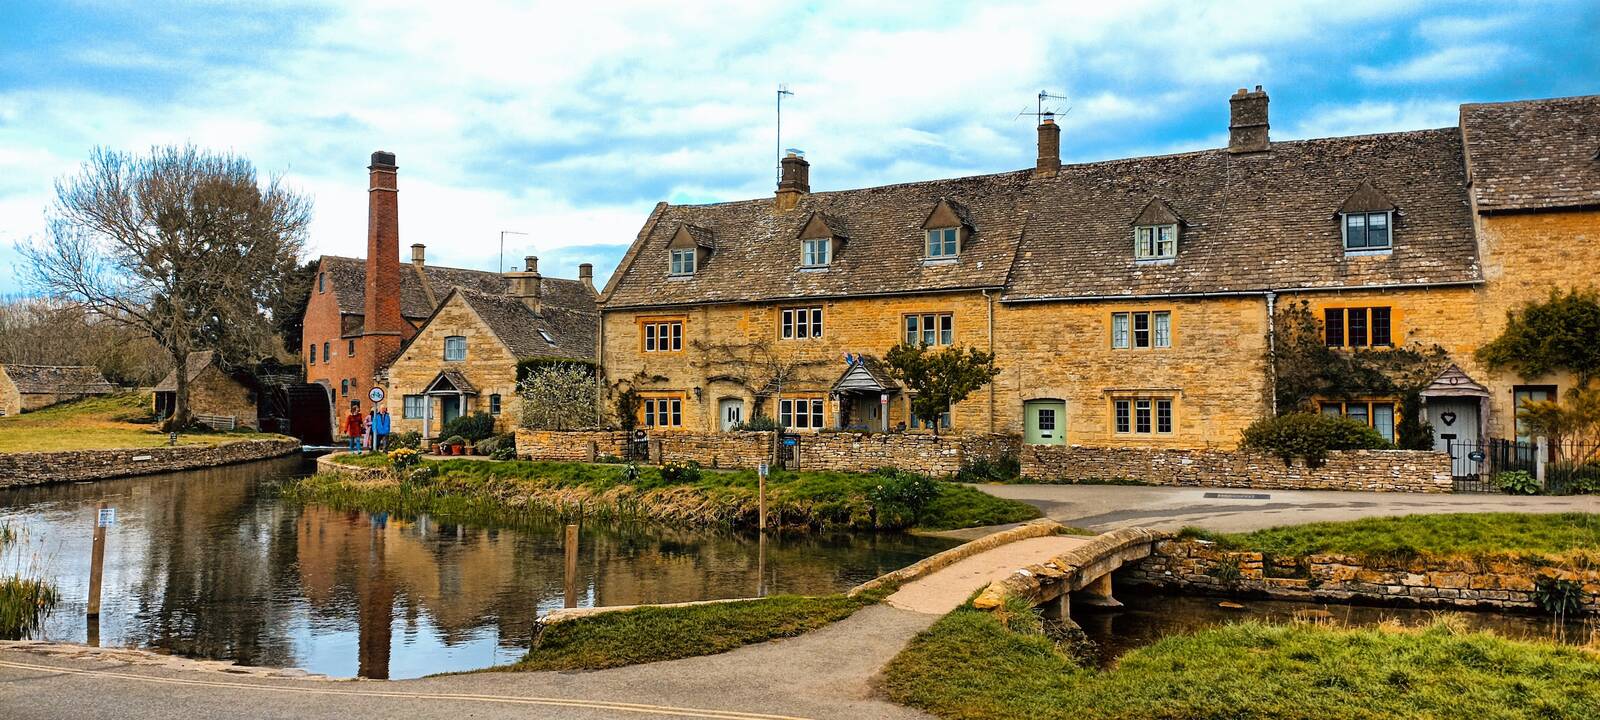 Image of Lower Slaughter Village by David Lally